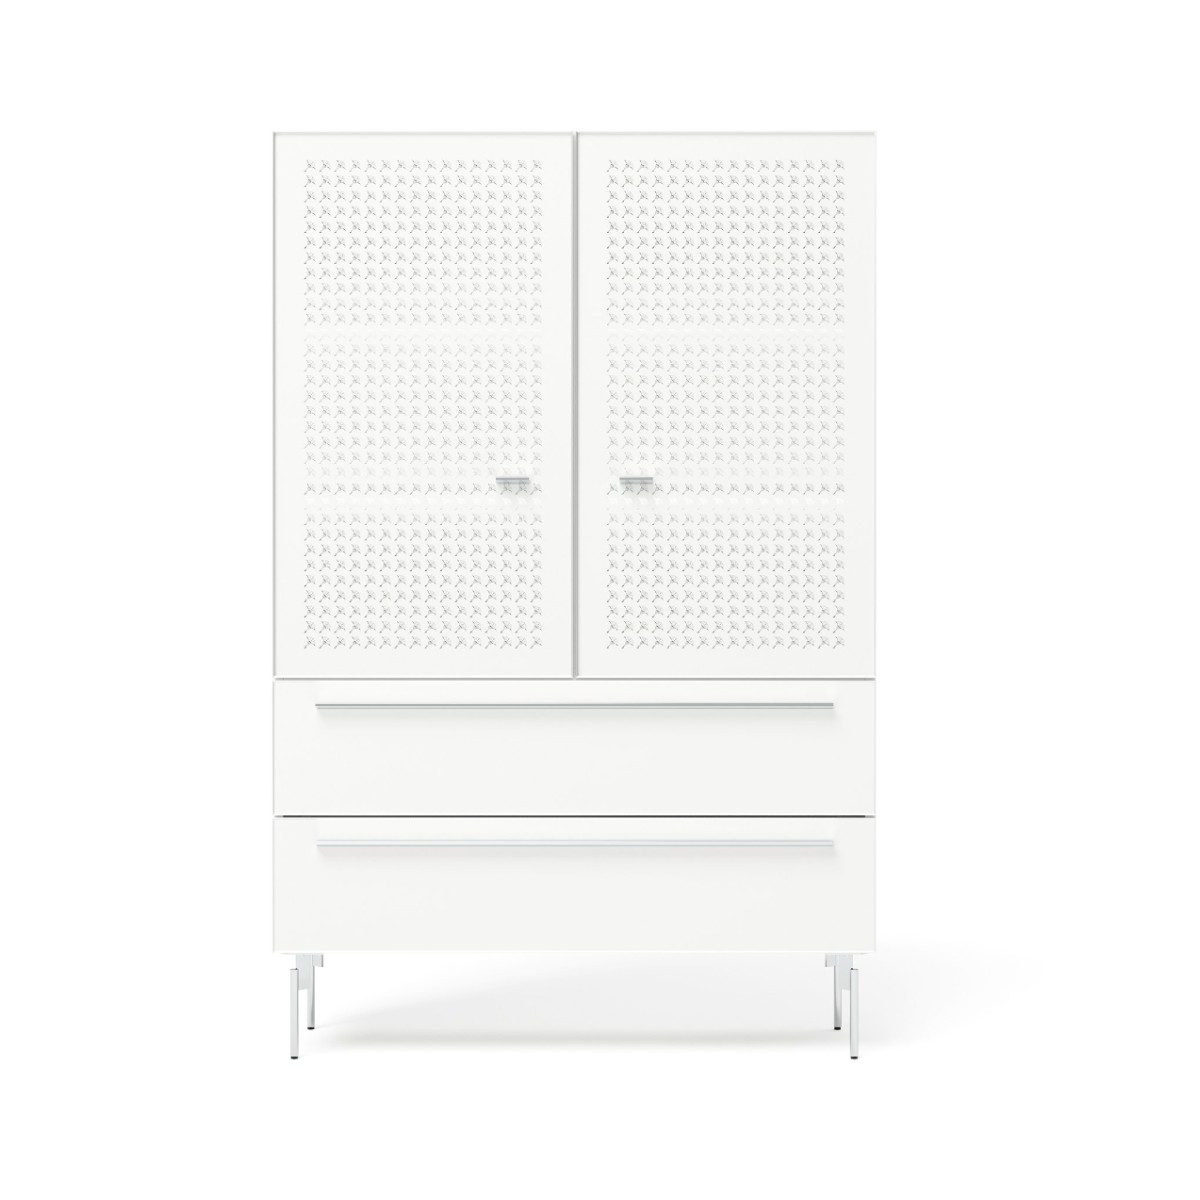 JOOP! Living / Dining systems 23216 Highboard in Lack weiß Frontalansicht